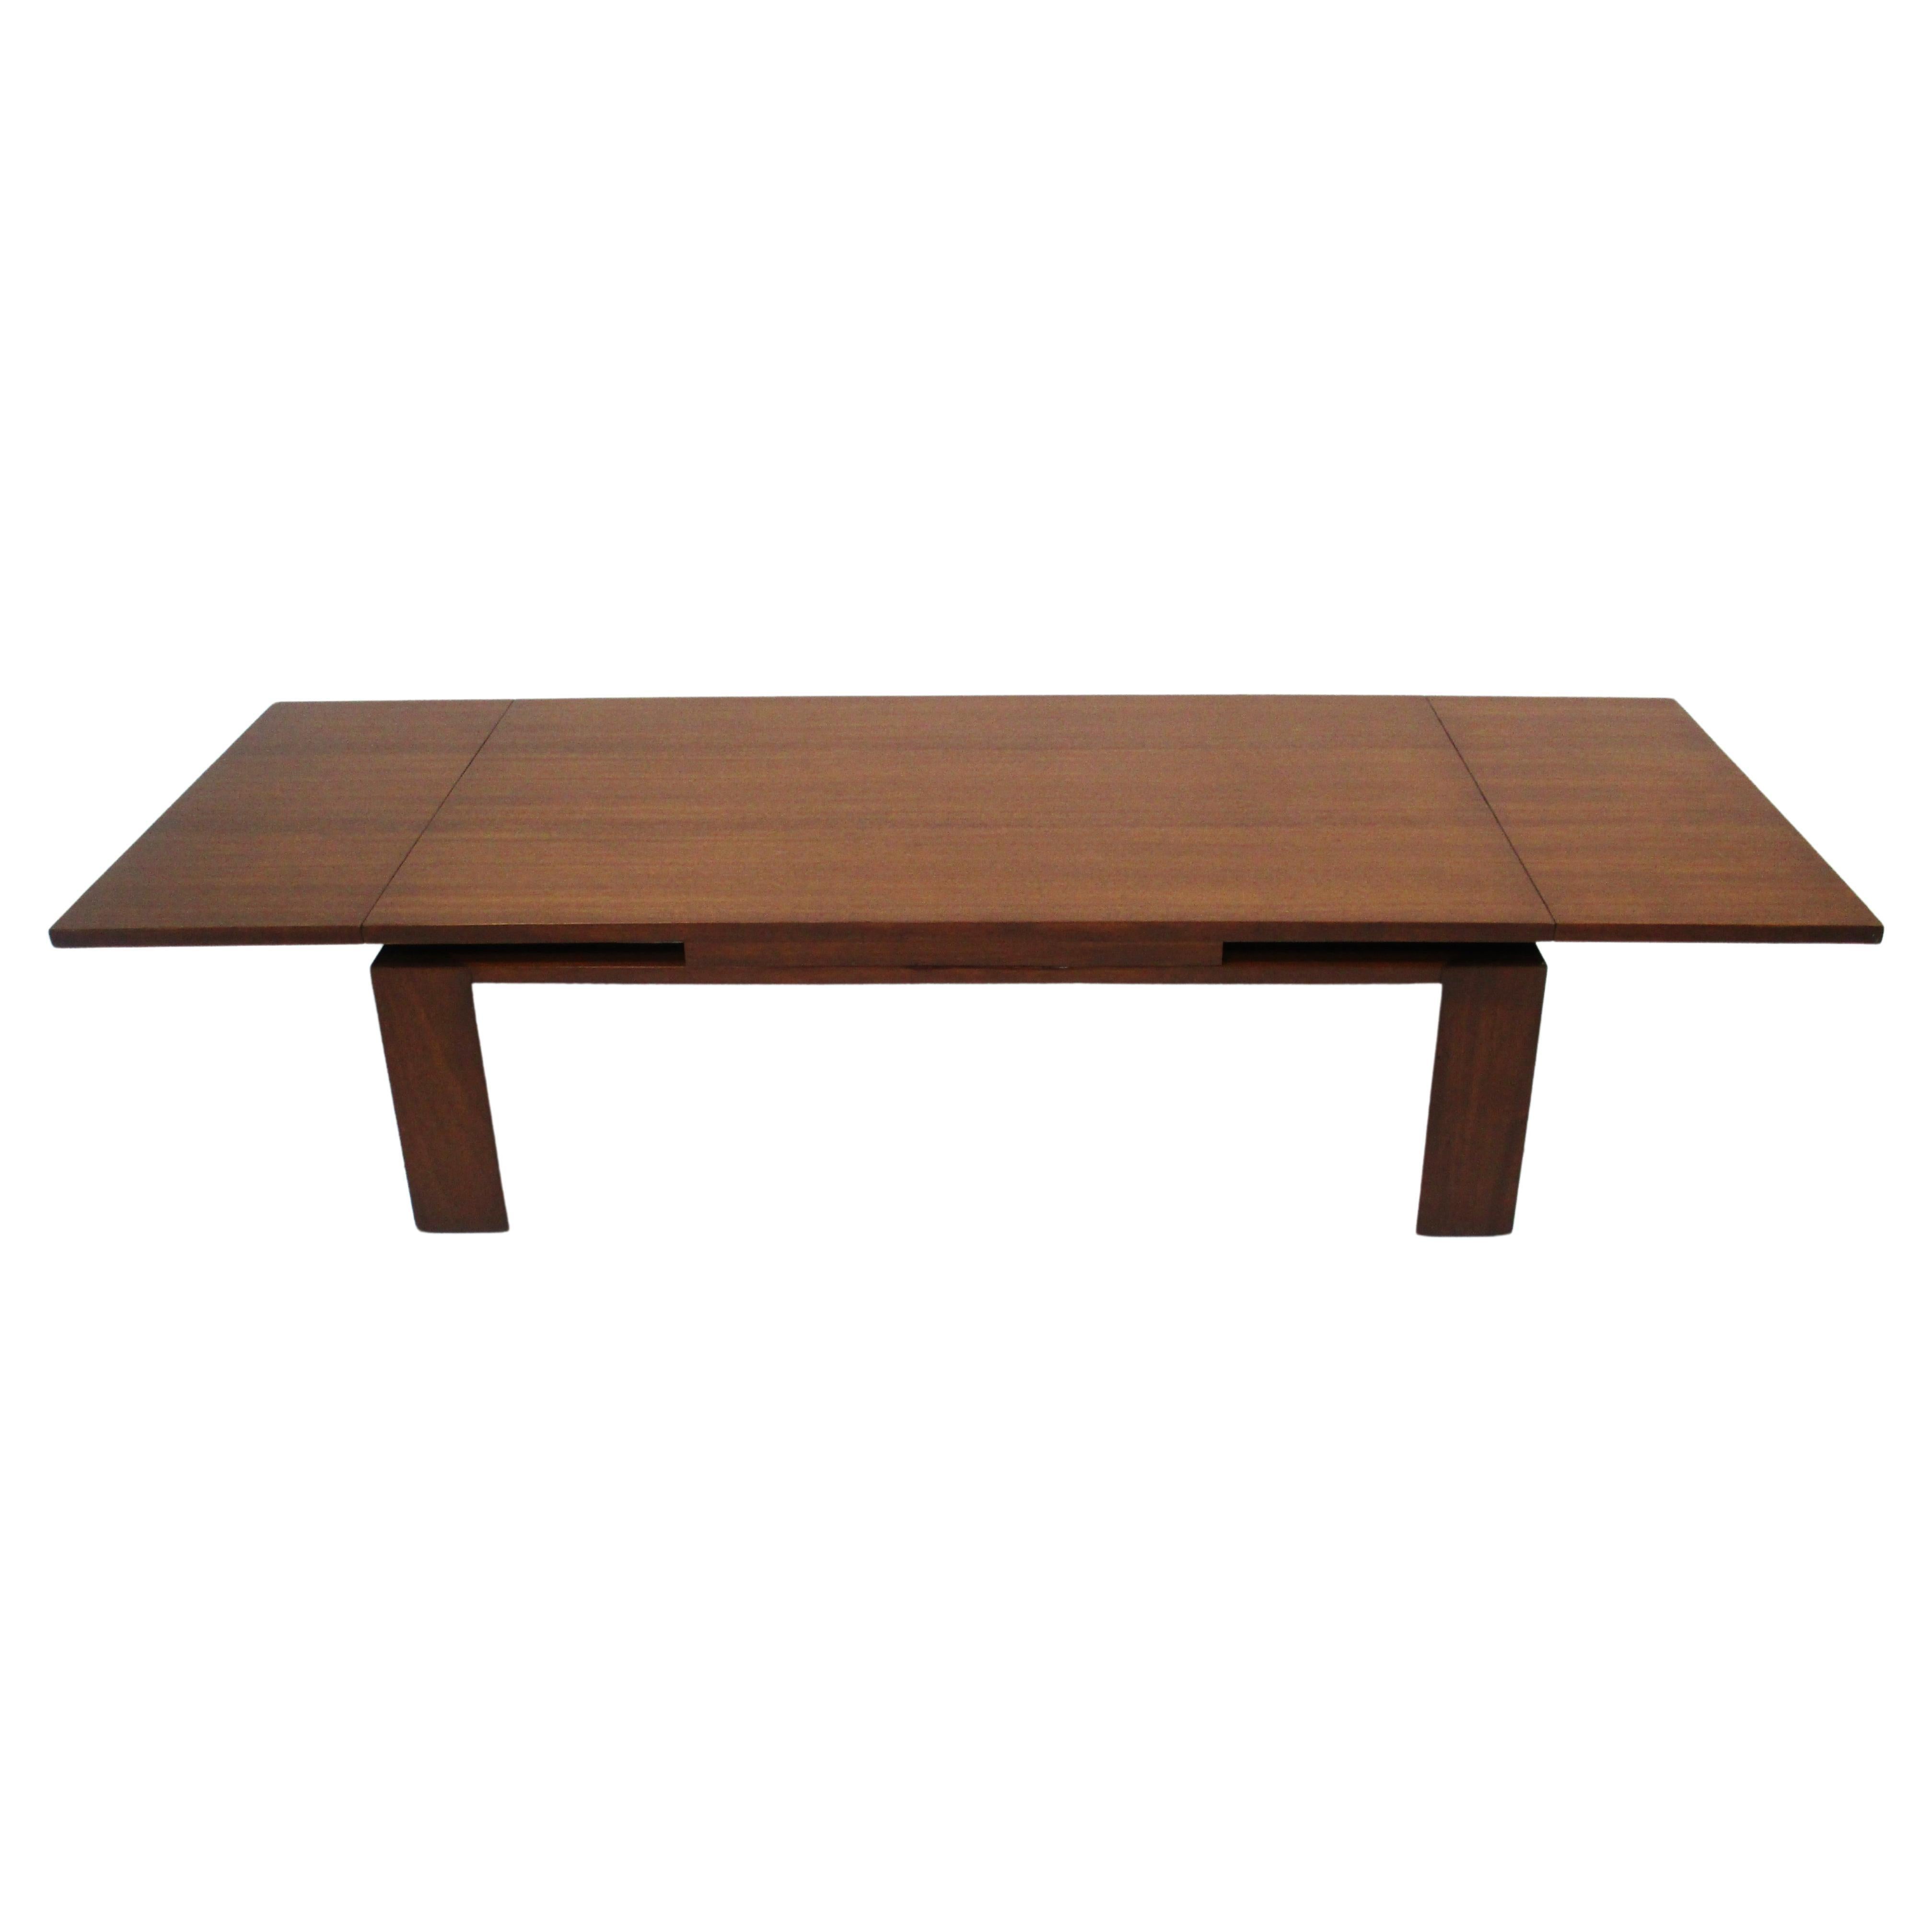 A very well crafted mahogany expanding refectory coffee table with each end that pulls out making the total length 68